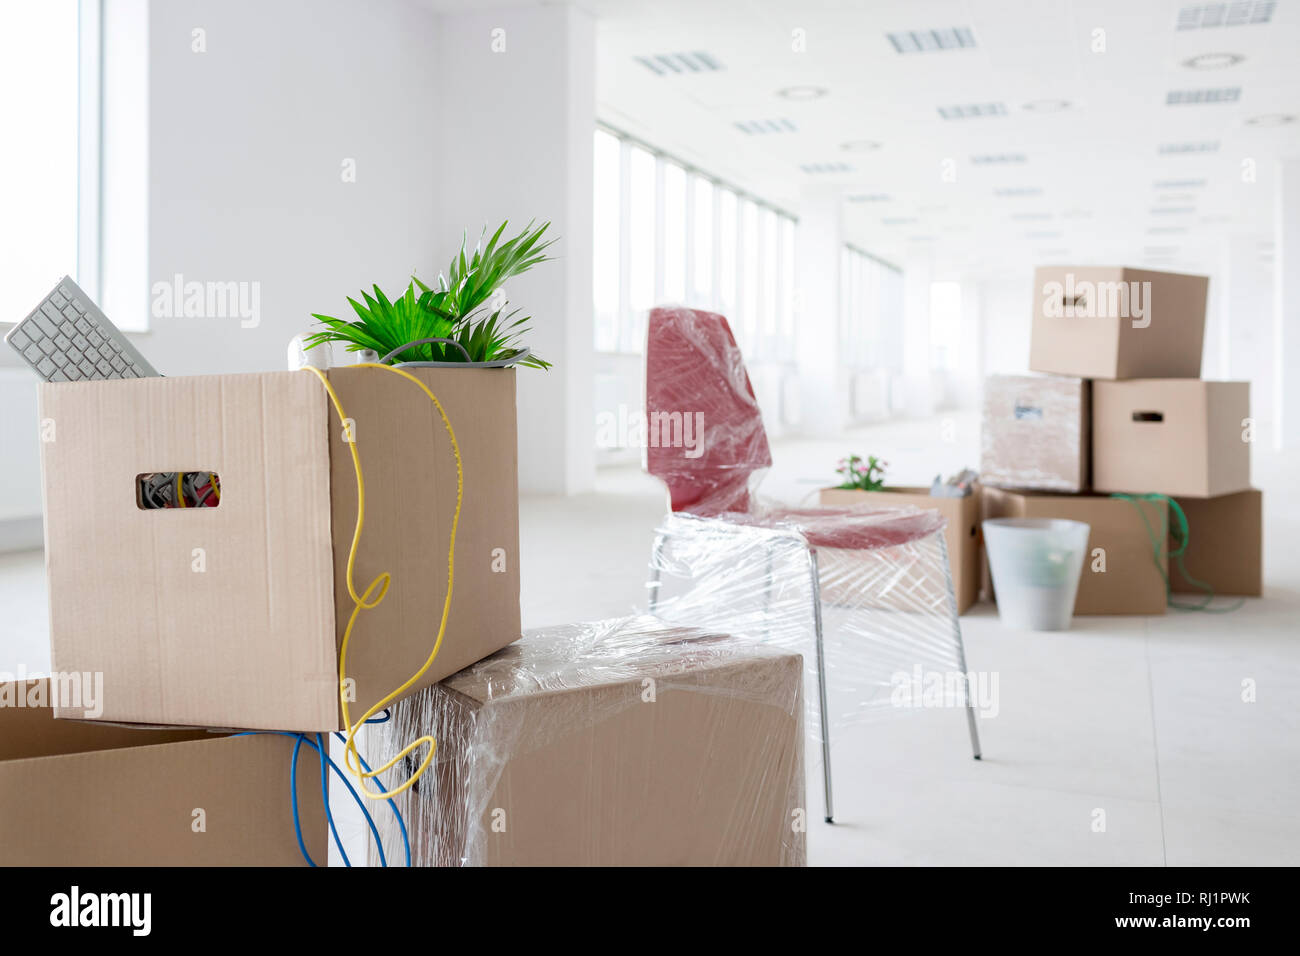 Cardboard boxes in new empty office Stock Photo